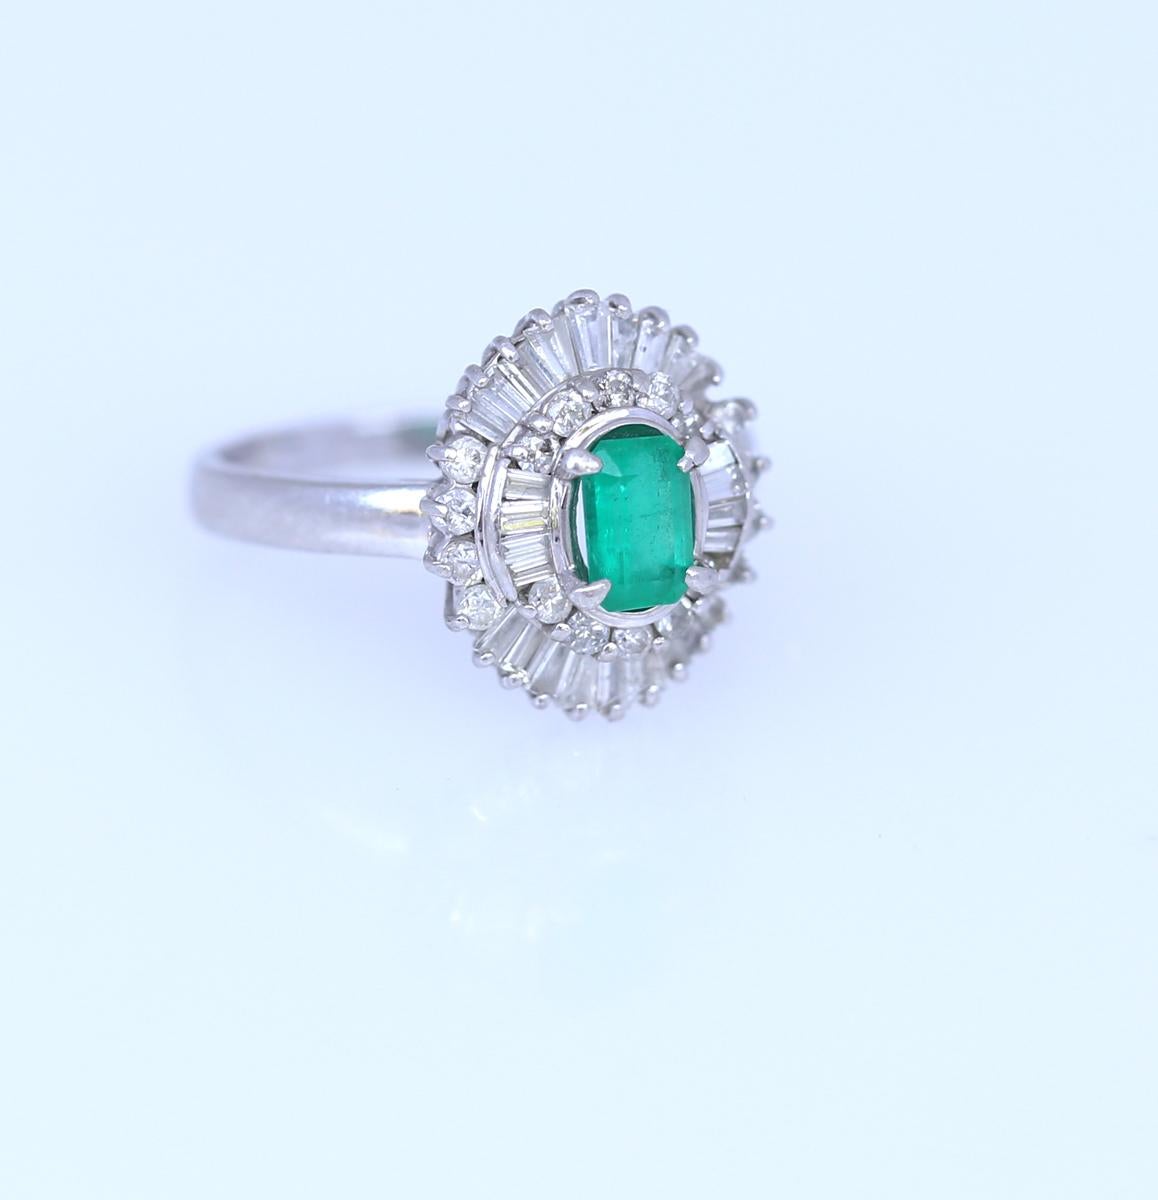 Fine Baguette and round cut Diamonds mounted in Platina surround an emerald-cut Emerald.  The whole fine design of the ring reminds of a magical flower. Total approximate weight of Diamonds: 1.7 Carats.
Delicate and elegant it is superbly crafted by